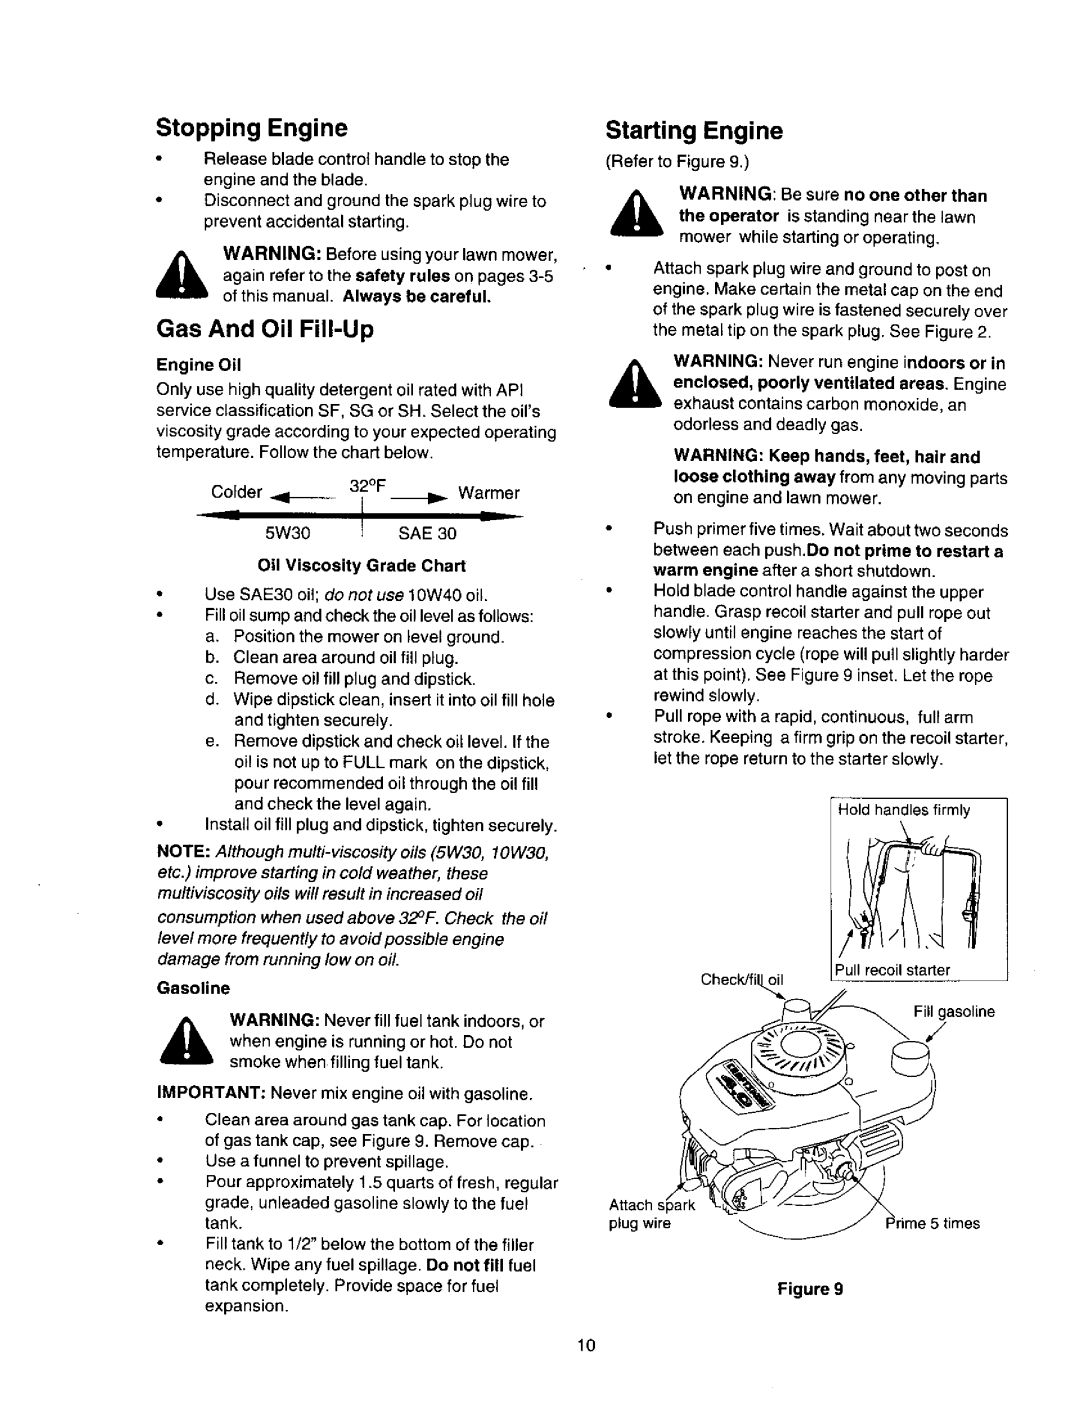 Craftsman 247.388250 owner manual Stopping Engine, Gas And Oil Fill-Up, Starting Engine 